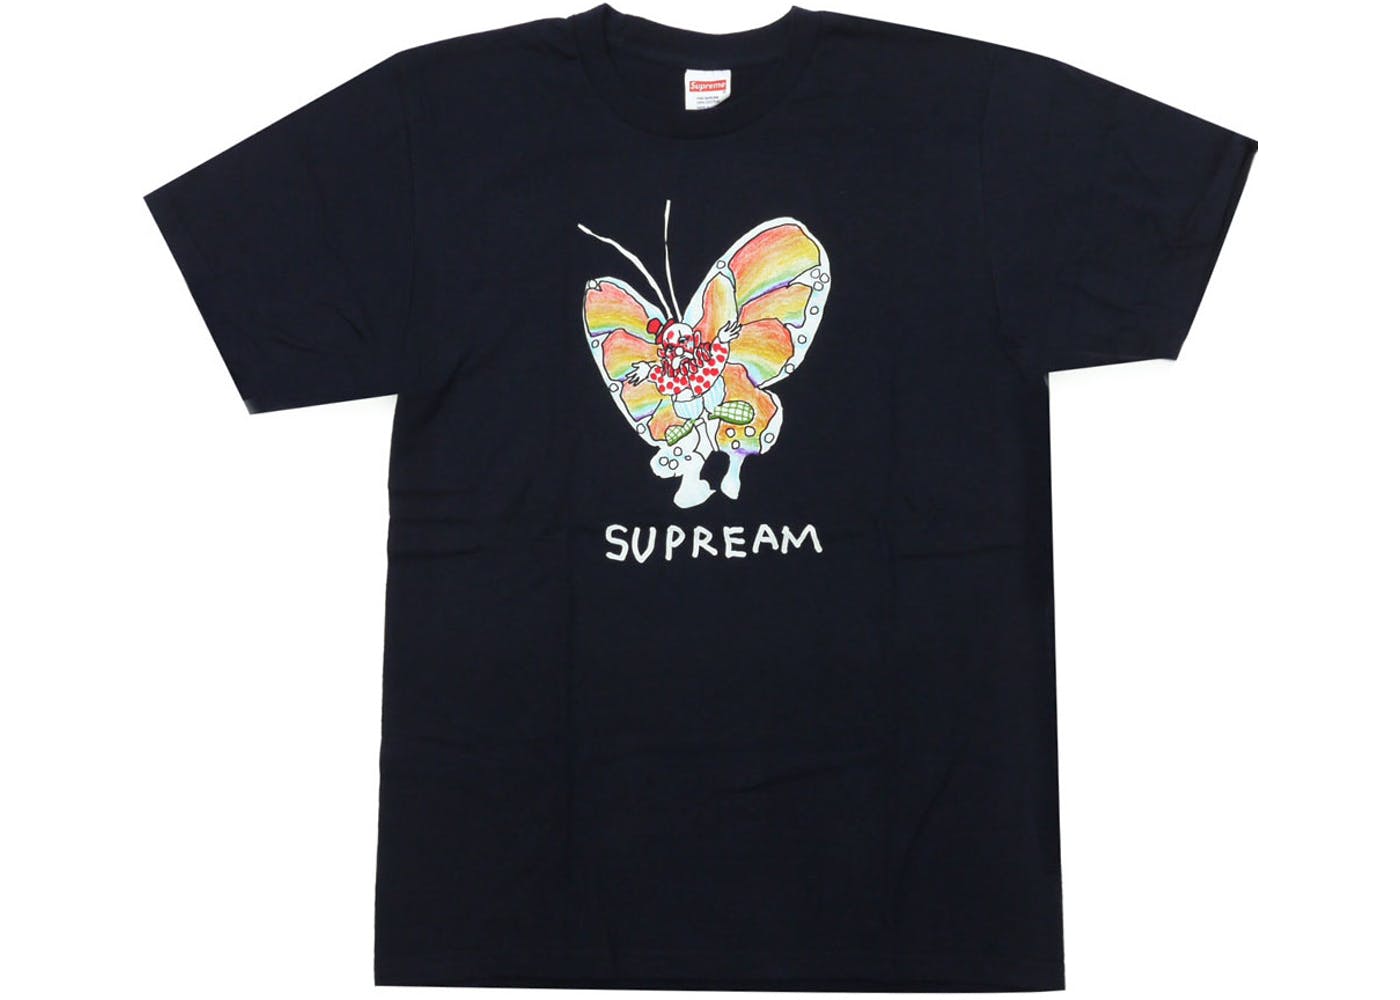 images.stockx.com/images/Supreme-Gonz-Butterfly-Te...